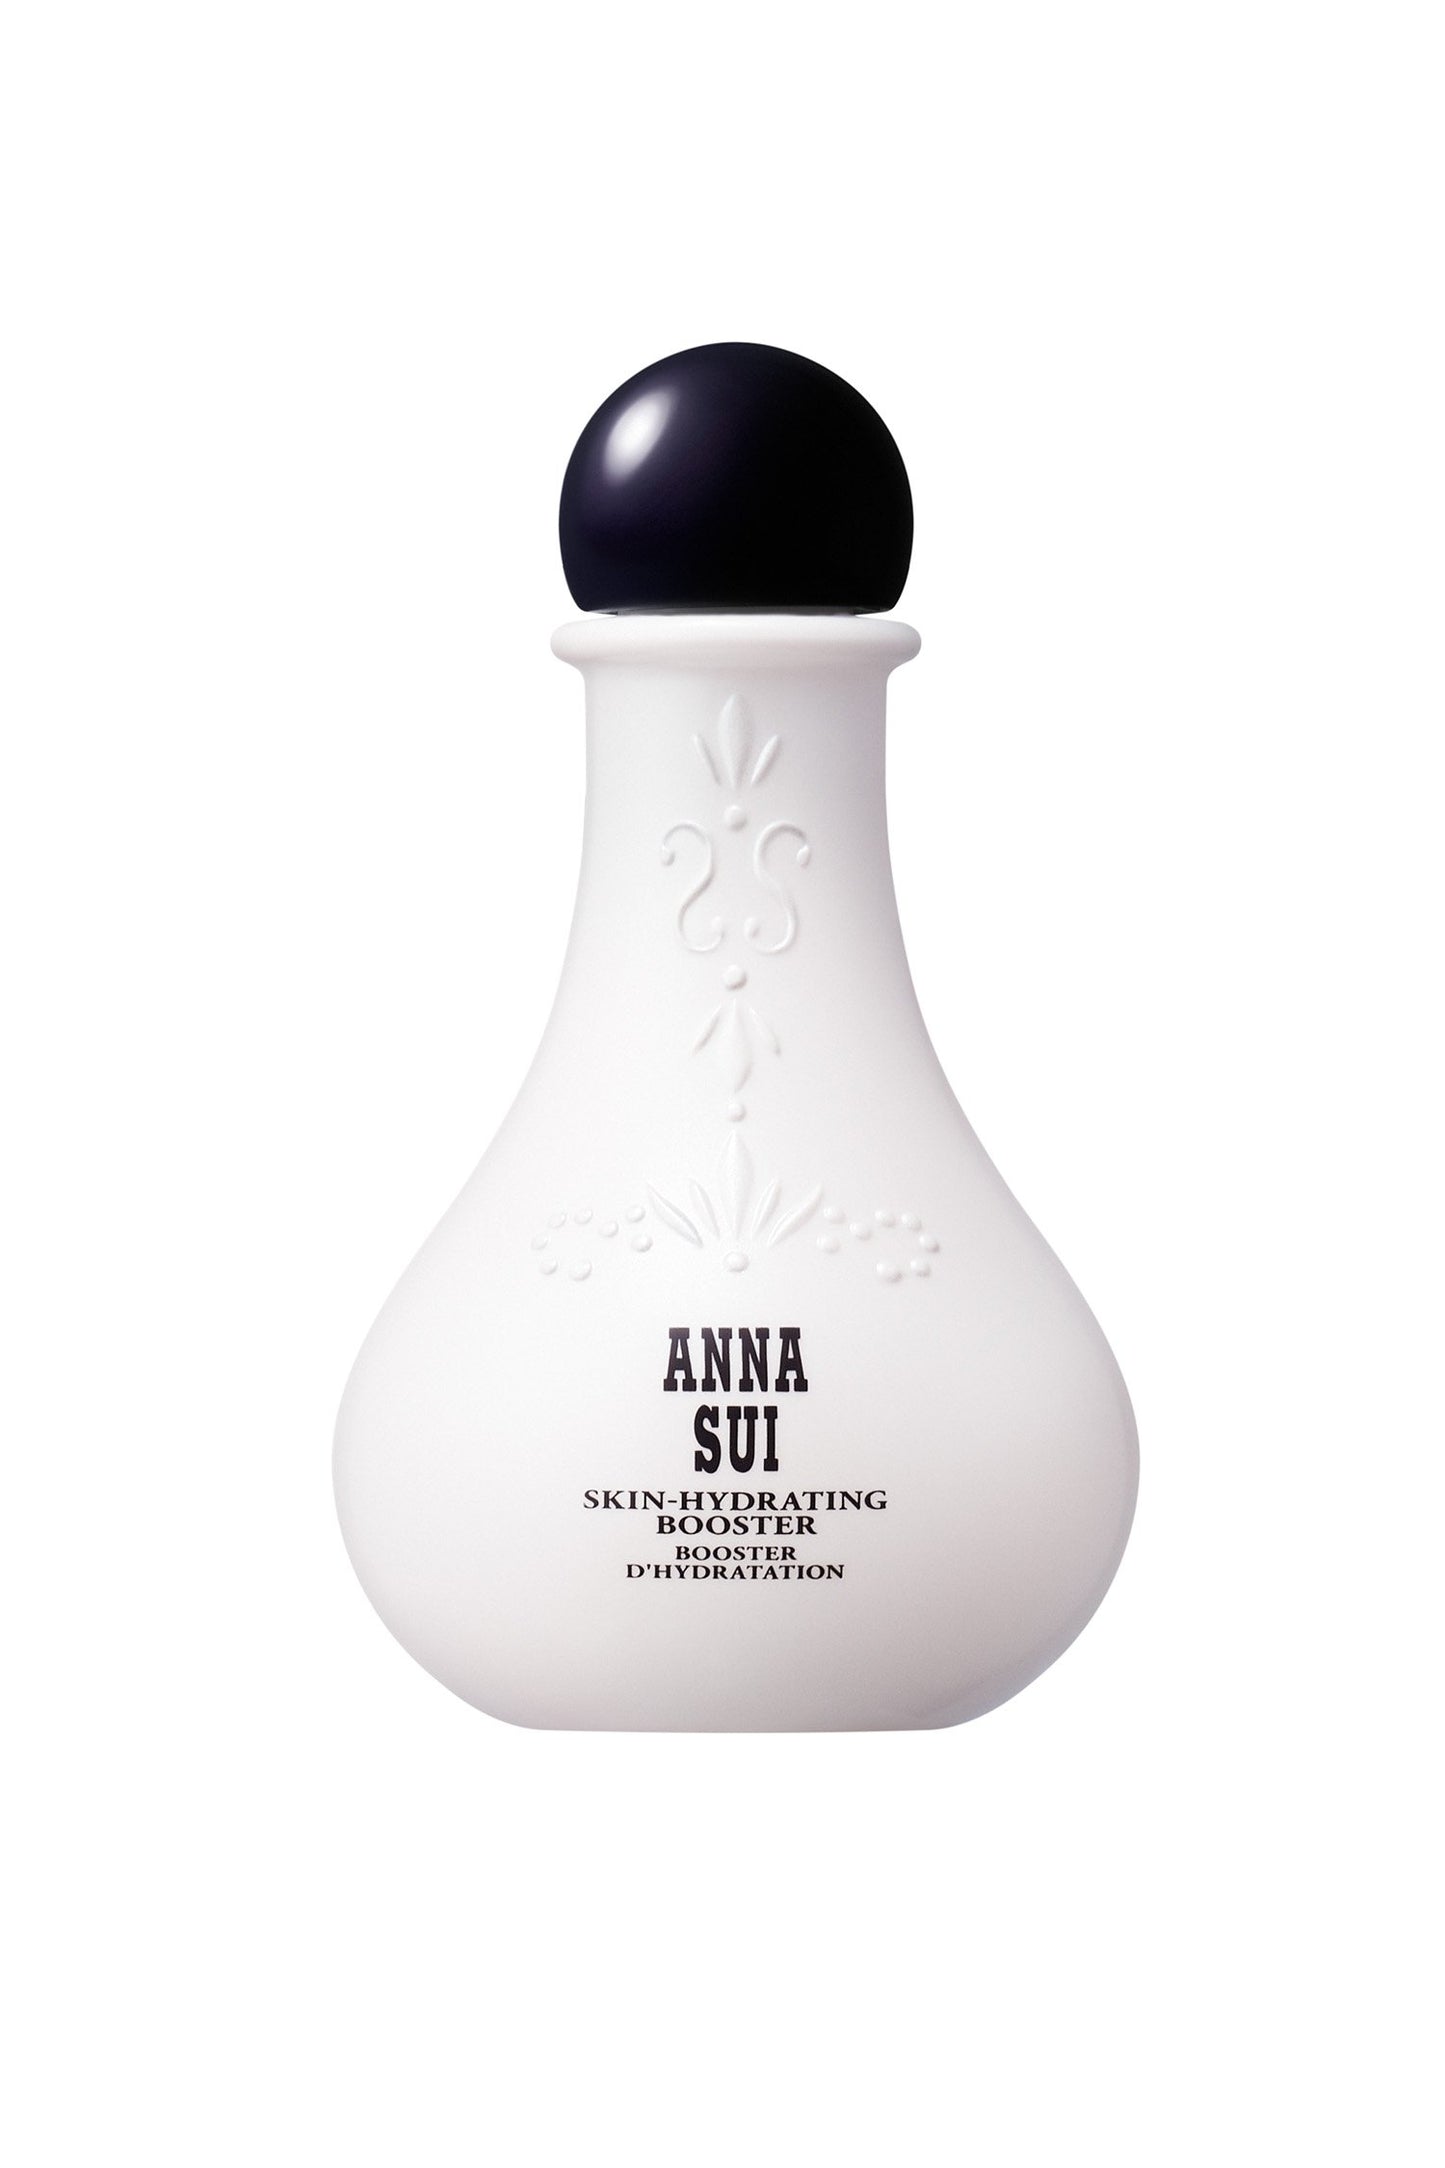 Booster in a white, bulb-shaped container, floral design & Anna branding, a round black cap on top